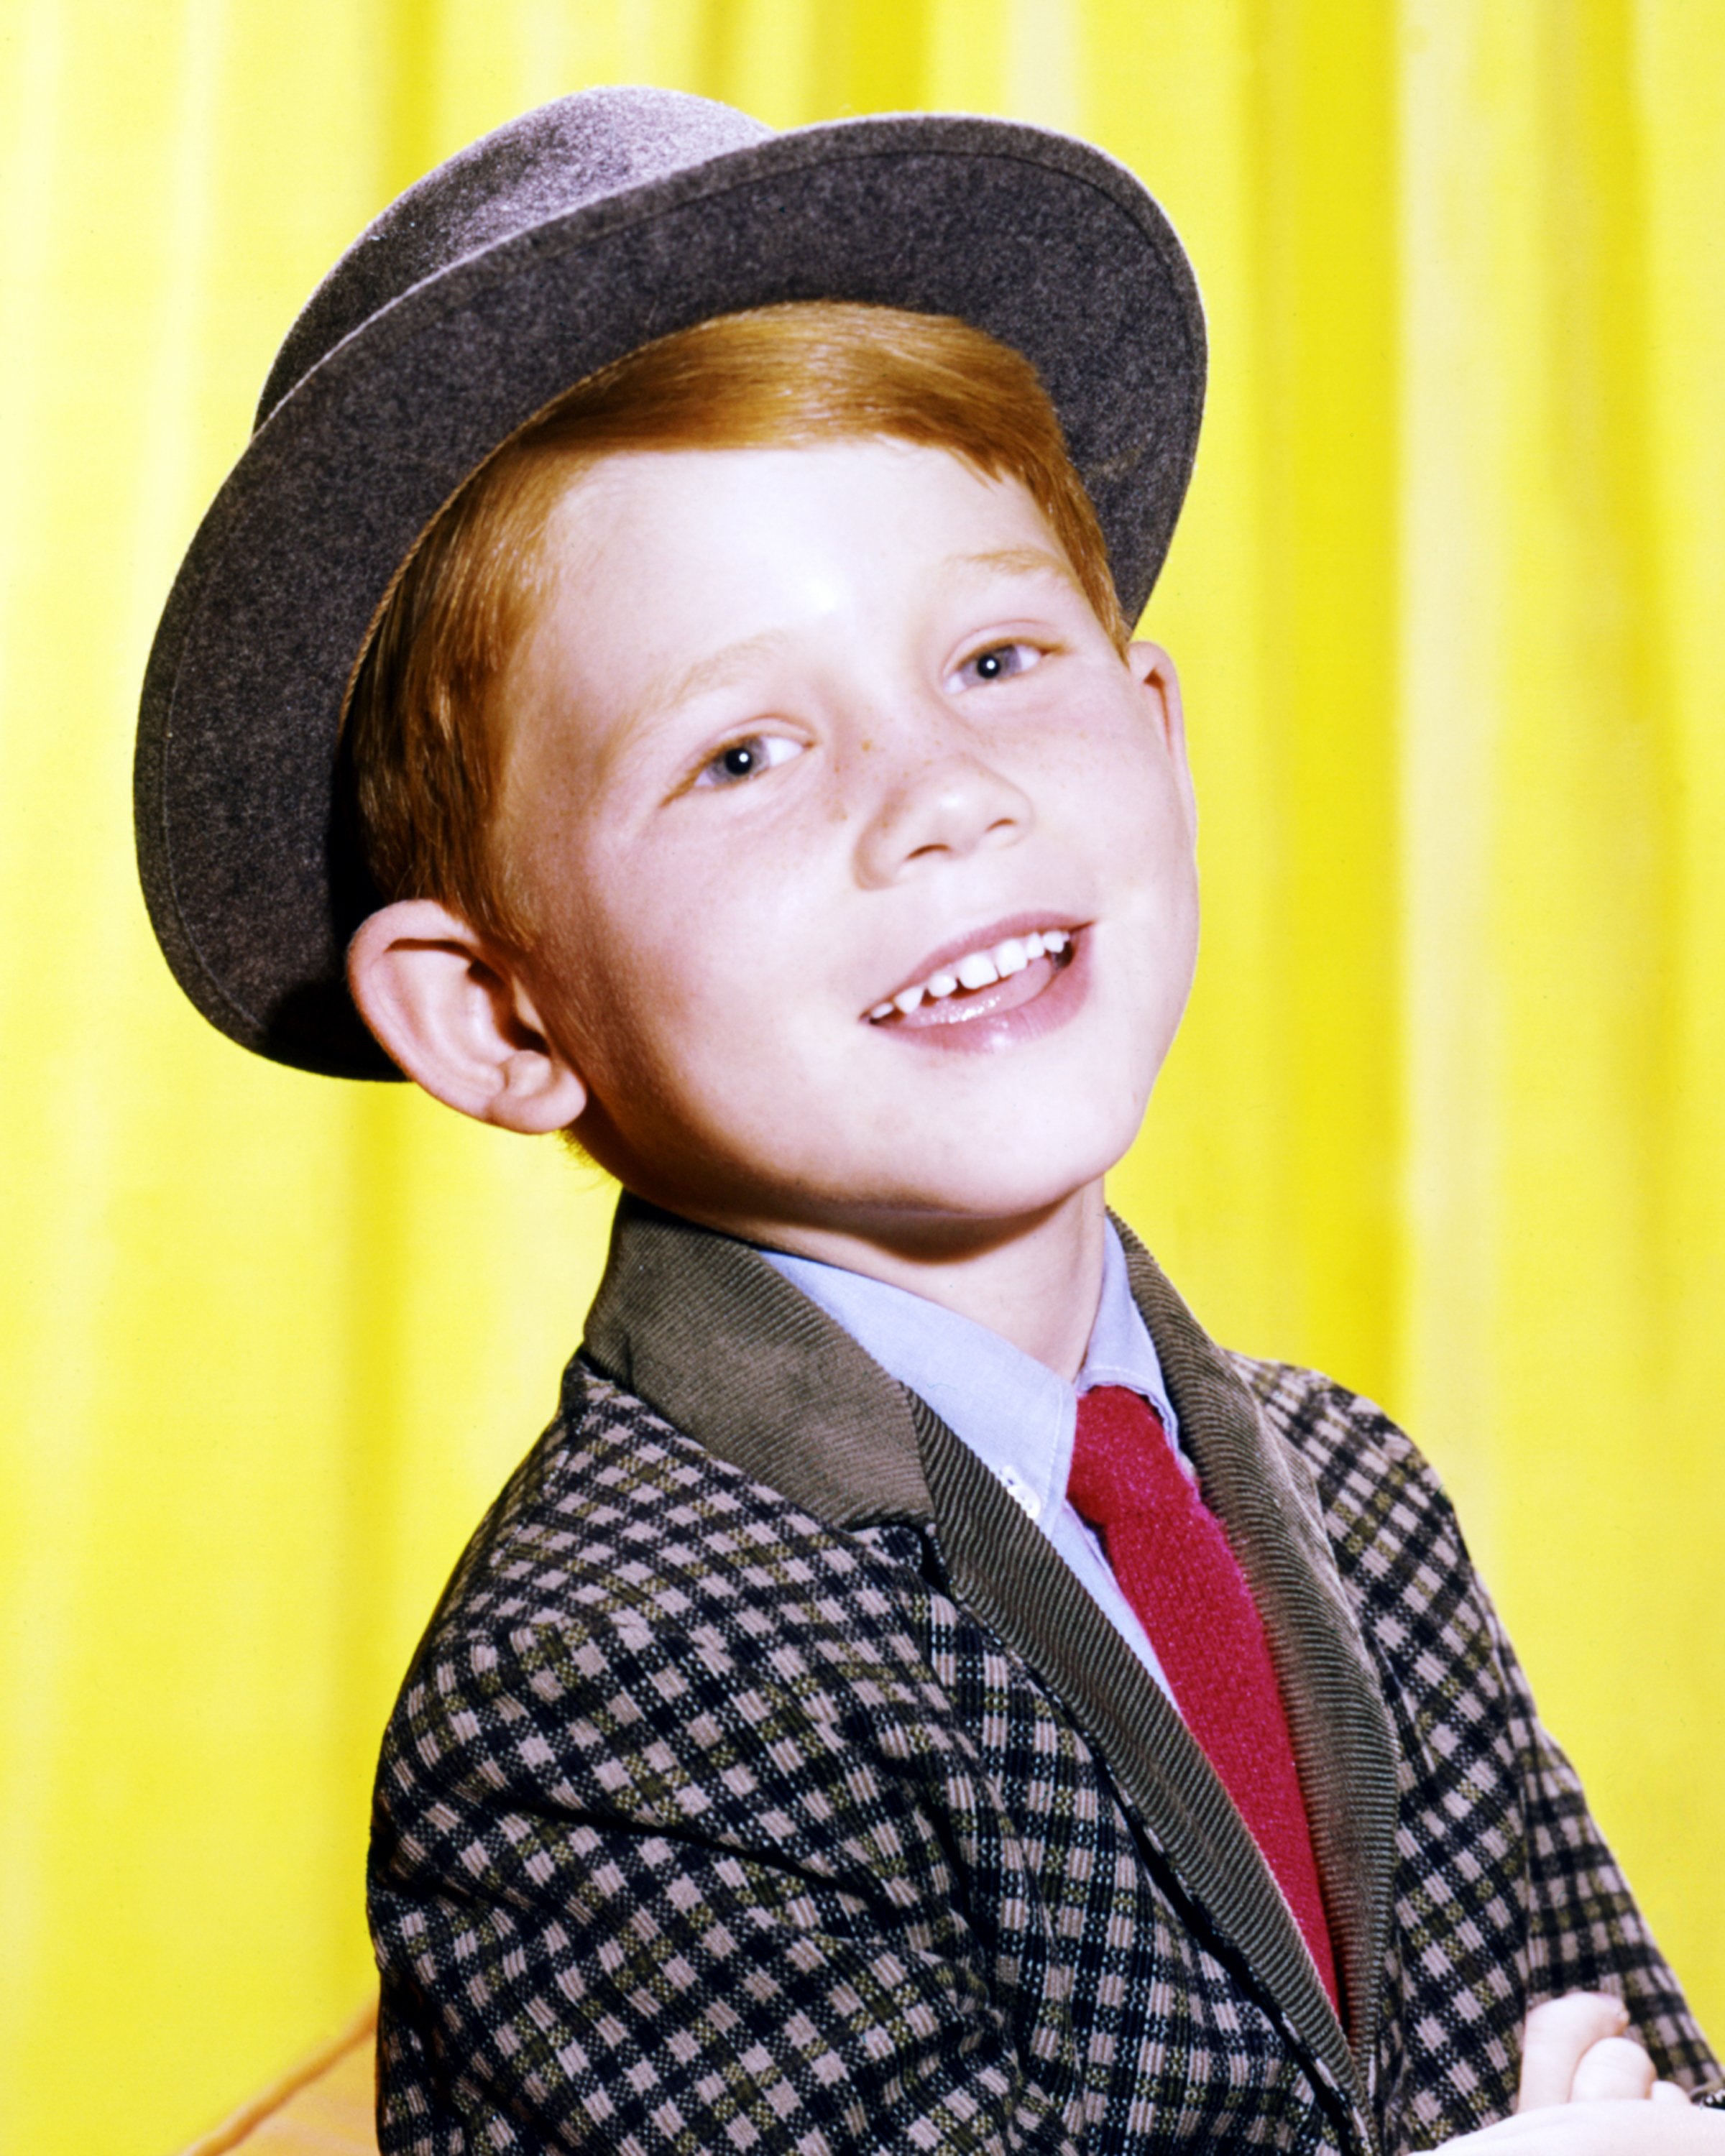 Actor and director, Ron Howard as Opie Taylor on the US television series, 'The Andy Griffith Show', USA, circa 1960. | Source: Getty Images